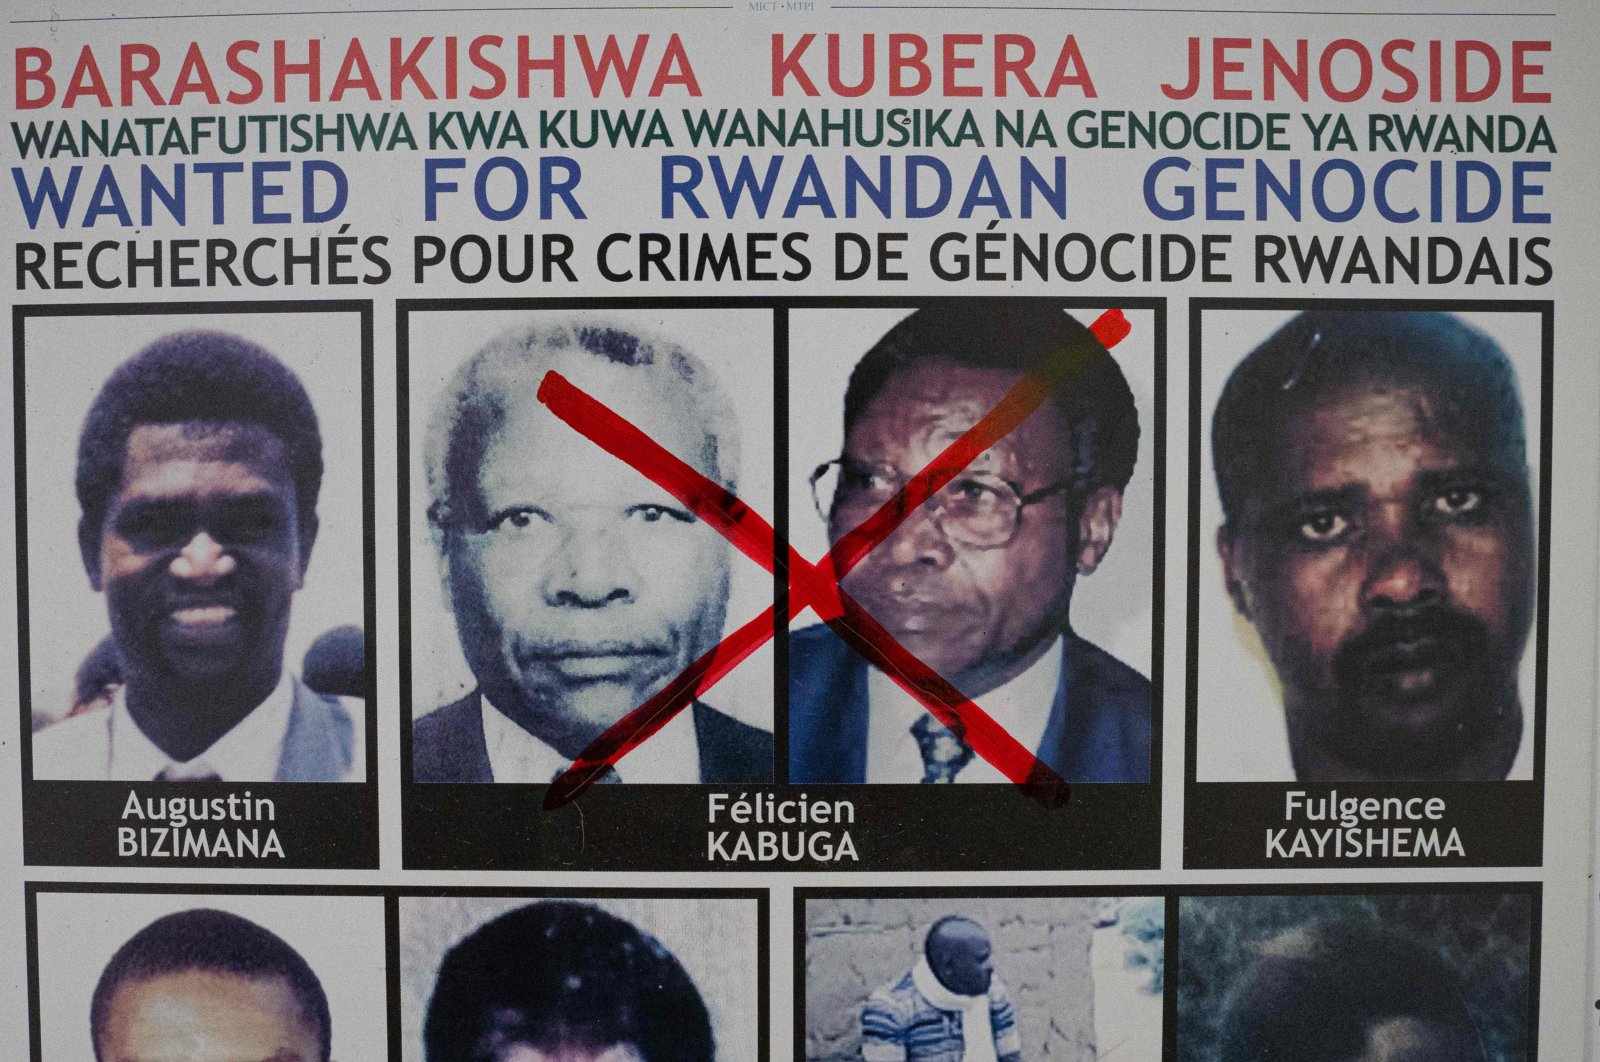 A red cross is seen drawn on the face of Felicien Kabuga, one of the last key suspects in the 1994 Rwandan genocide, on a wanted poster at the Genocide Fugitive Tracking Unit office in Kigali, Rwanda, May 19, 2020. (AFP)